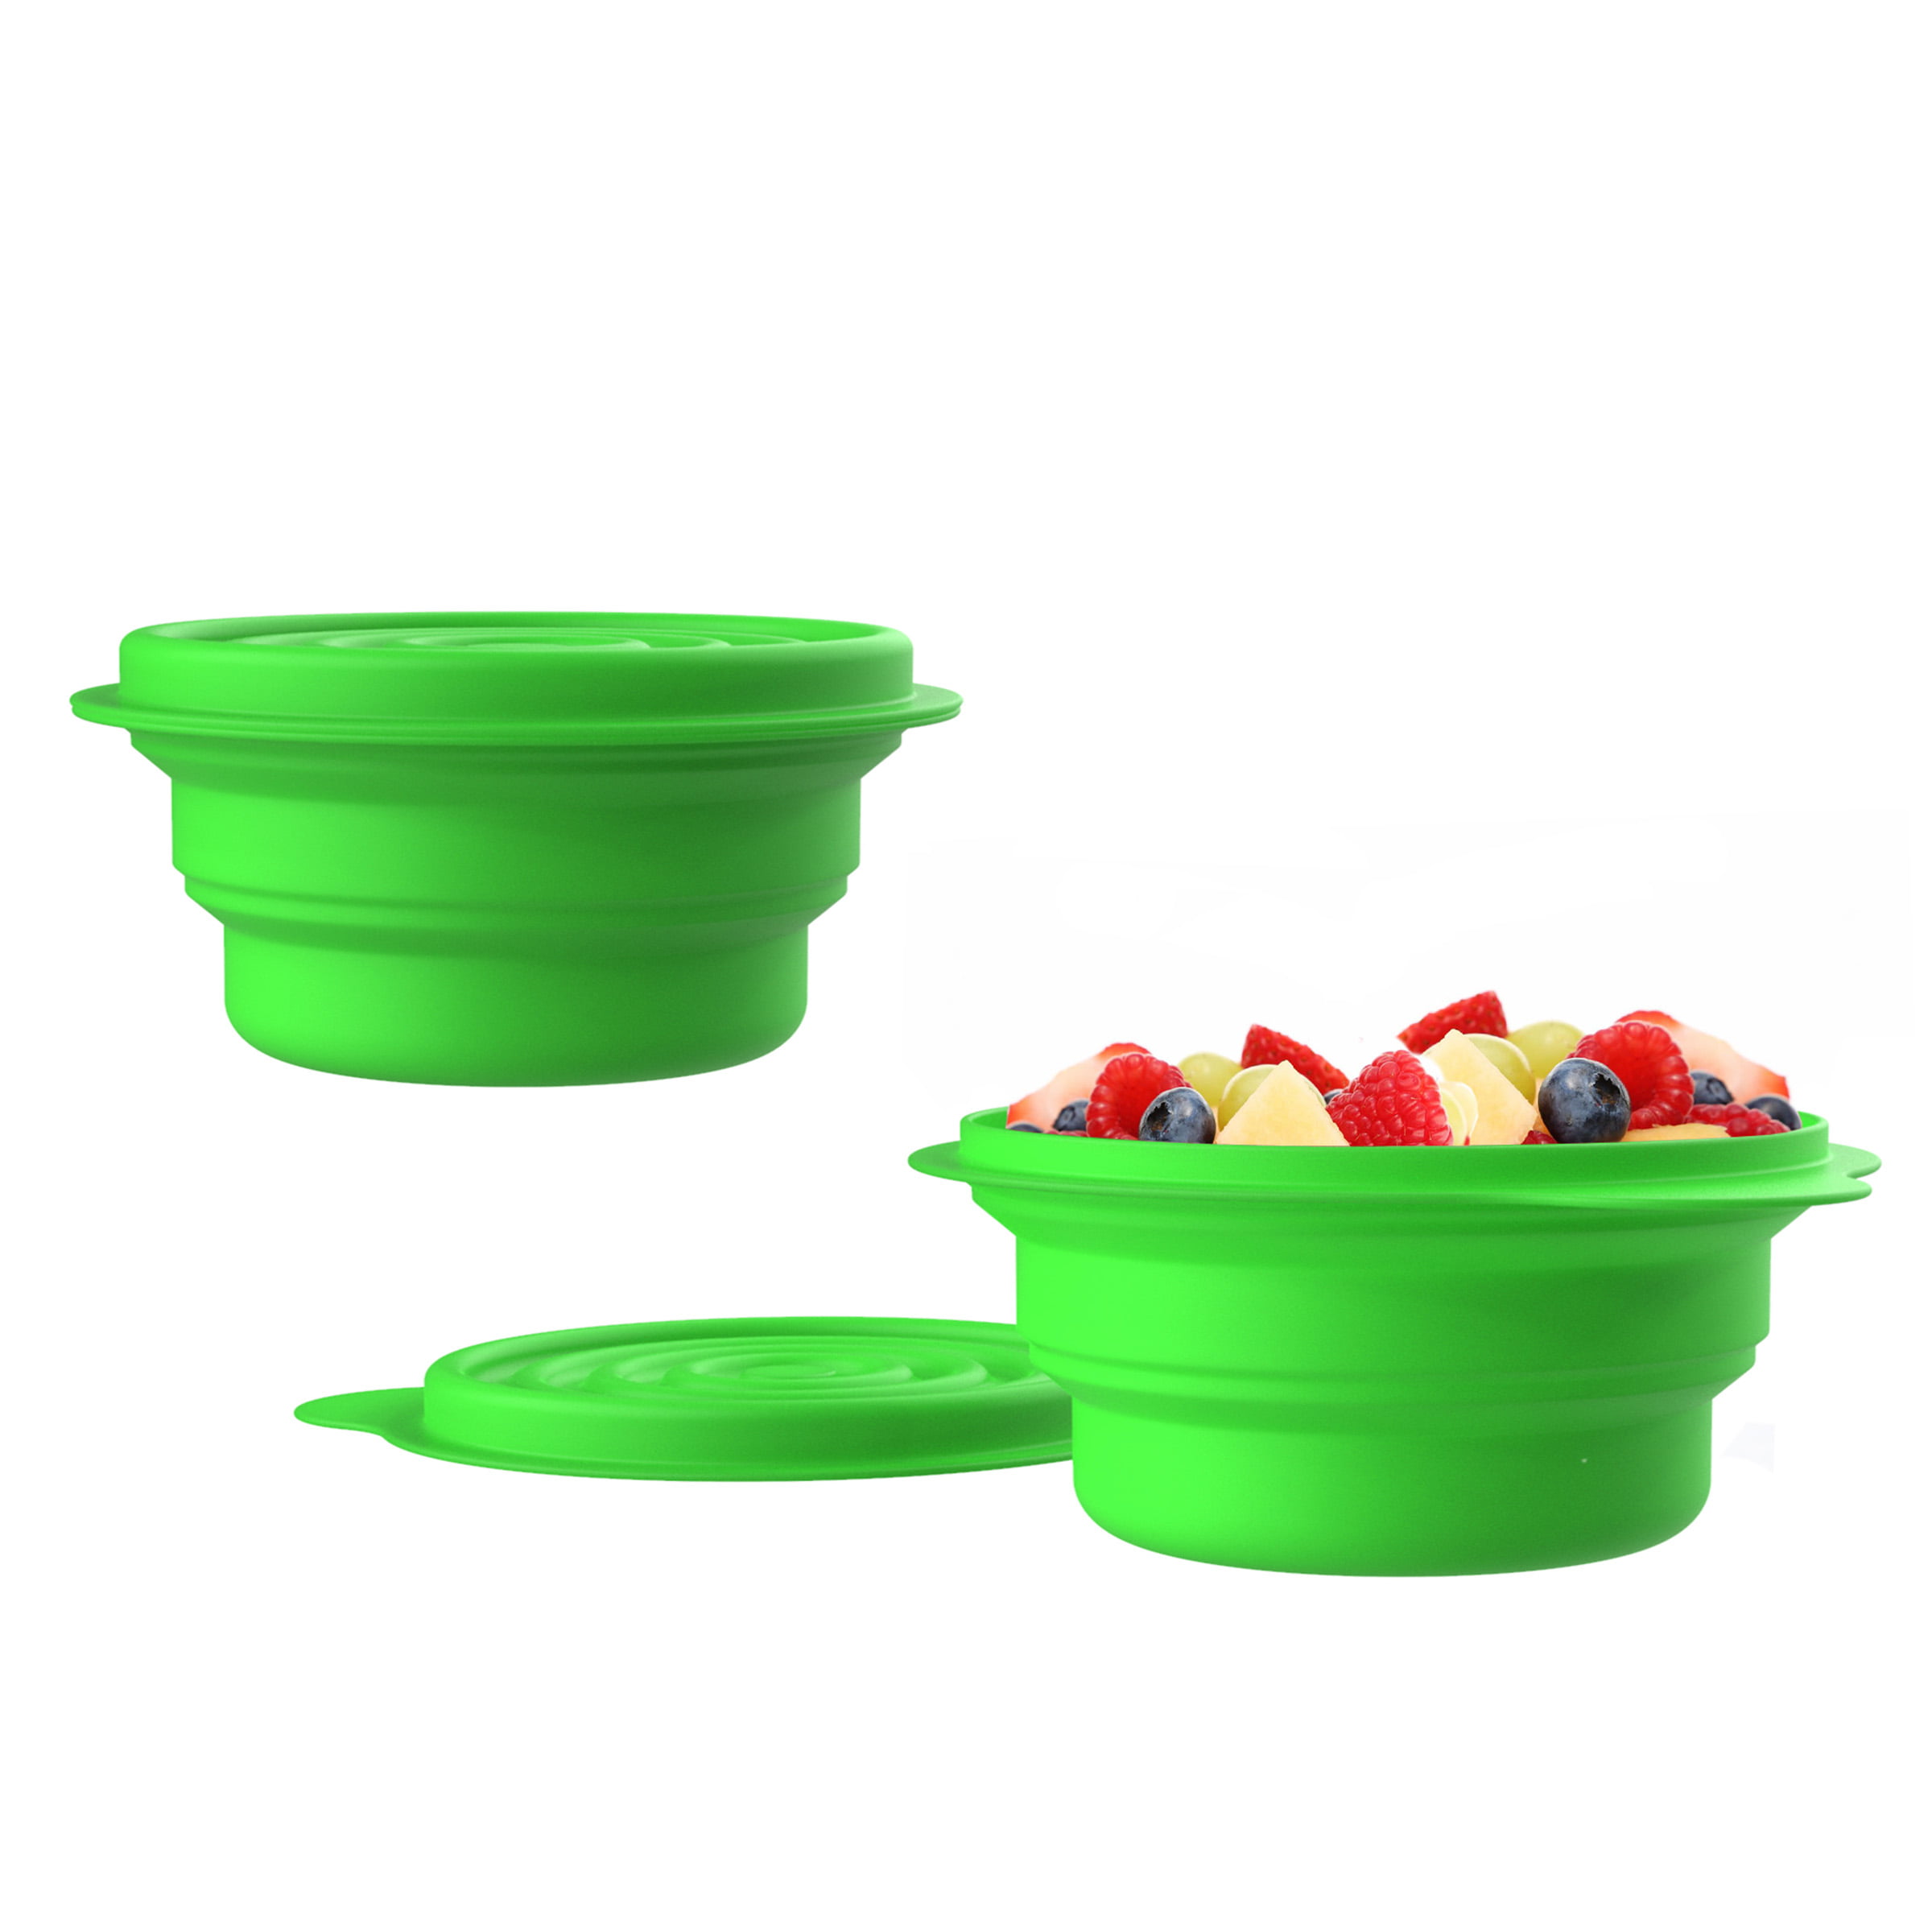 Silicone Folding Lunch Box Travel Bowl Portable Noodles Bowl Outdoor  Foldable Picnic Salad Bowl with Lid Cocina Cuisine 폴딩박스